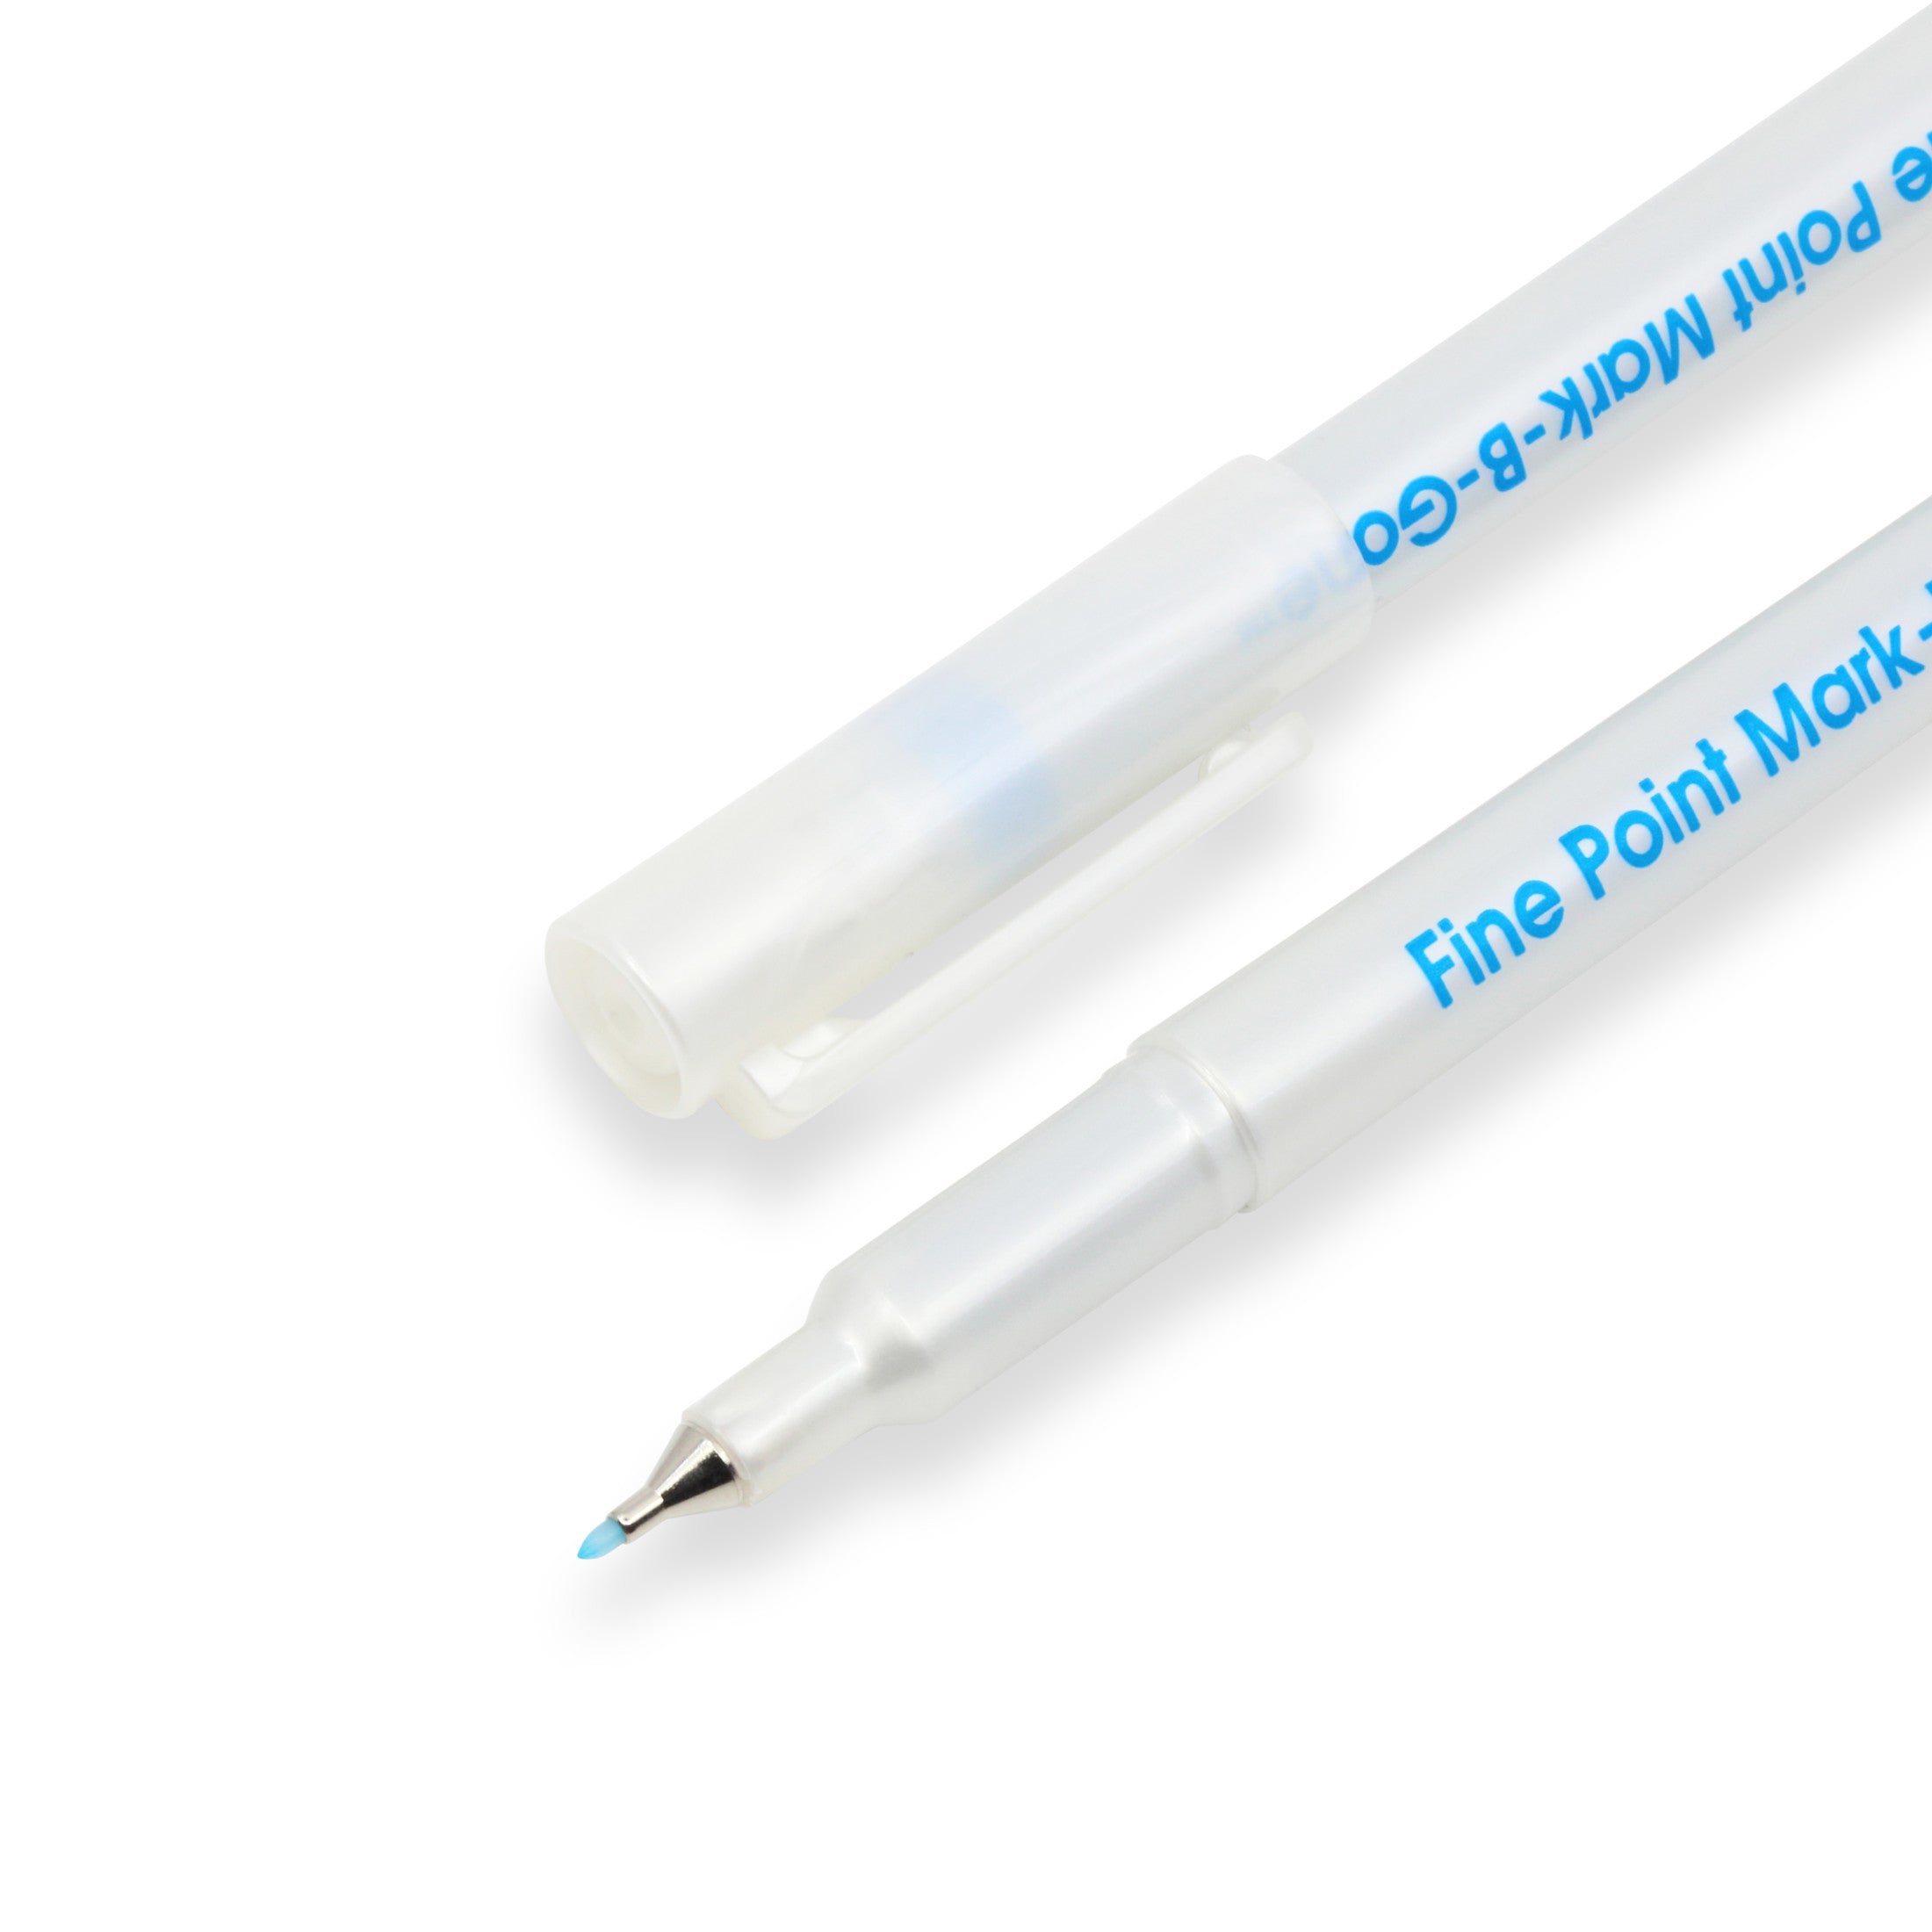 Water Soluble Pens for Embroidery 3ct (blue, red, purple)